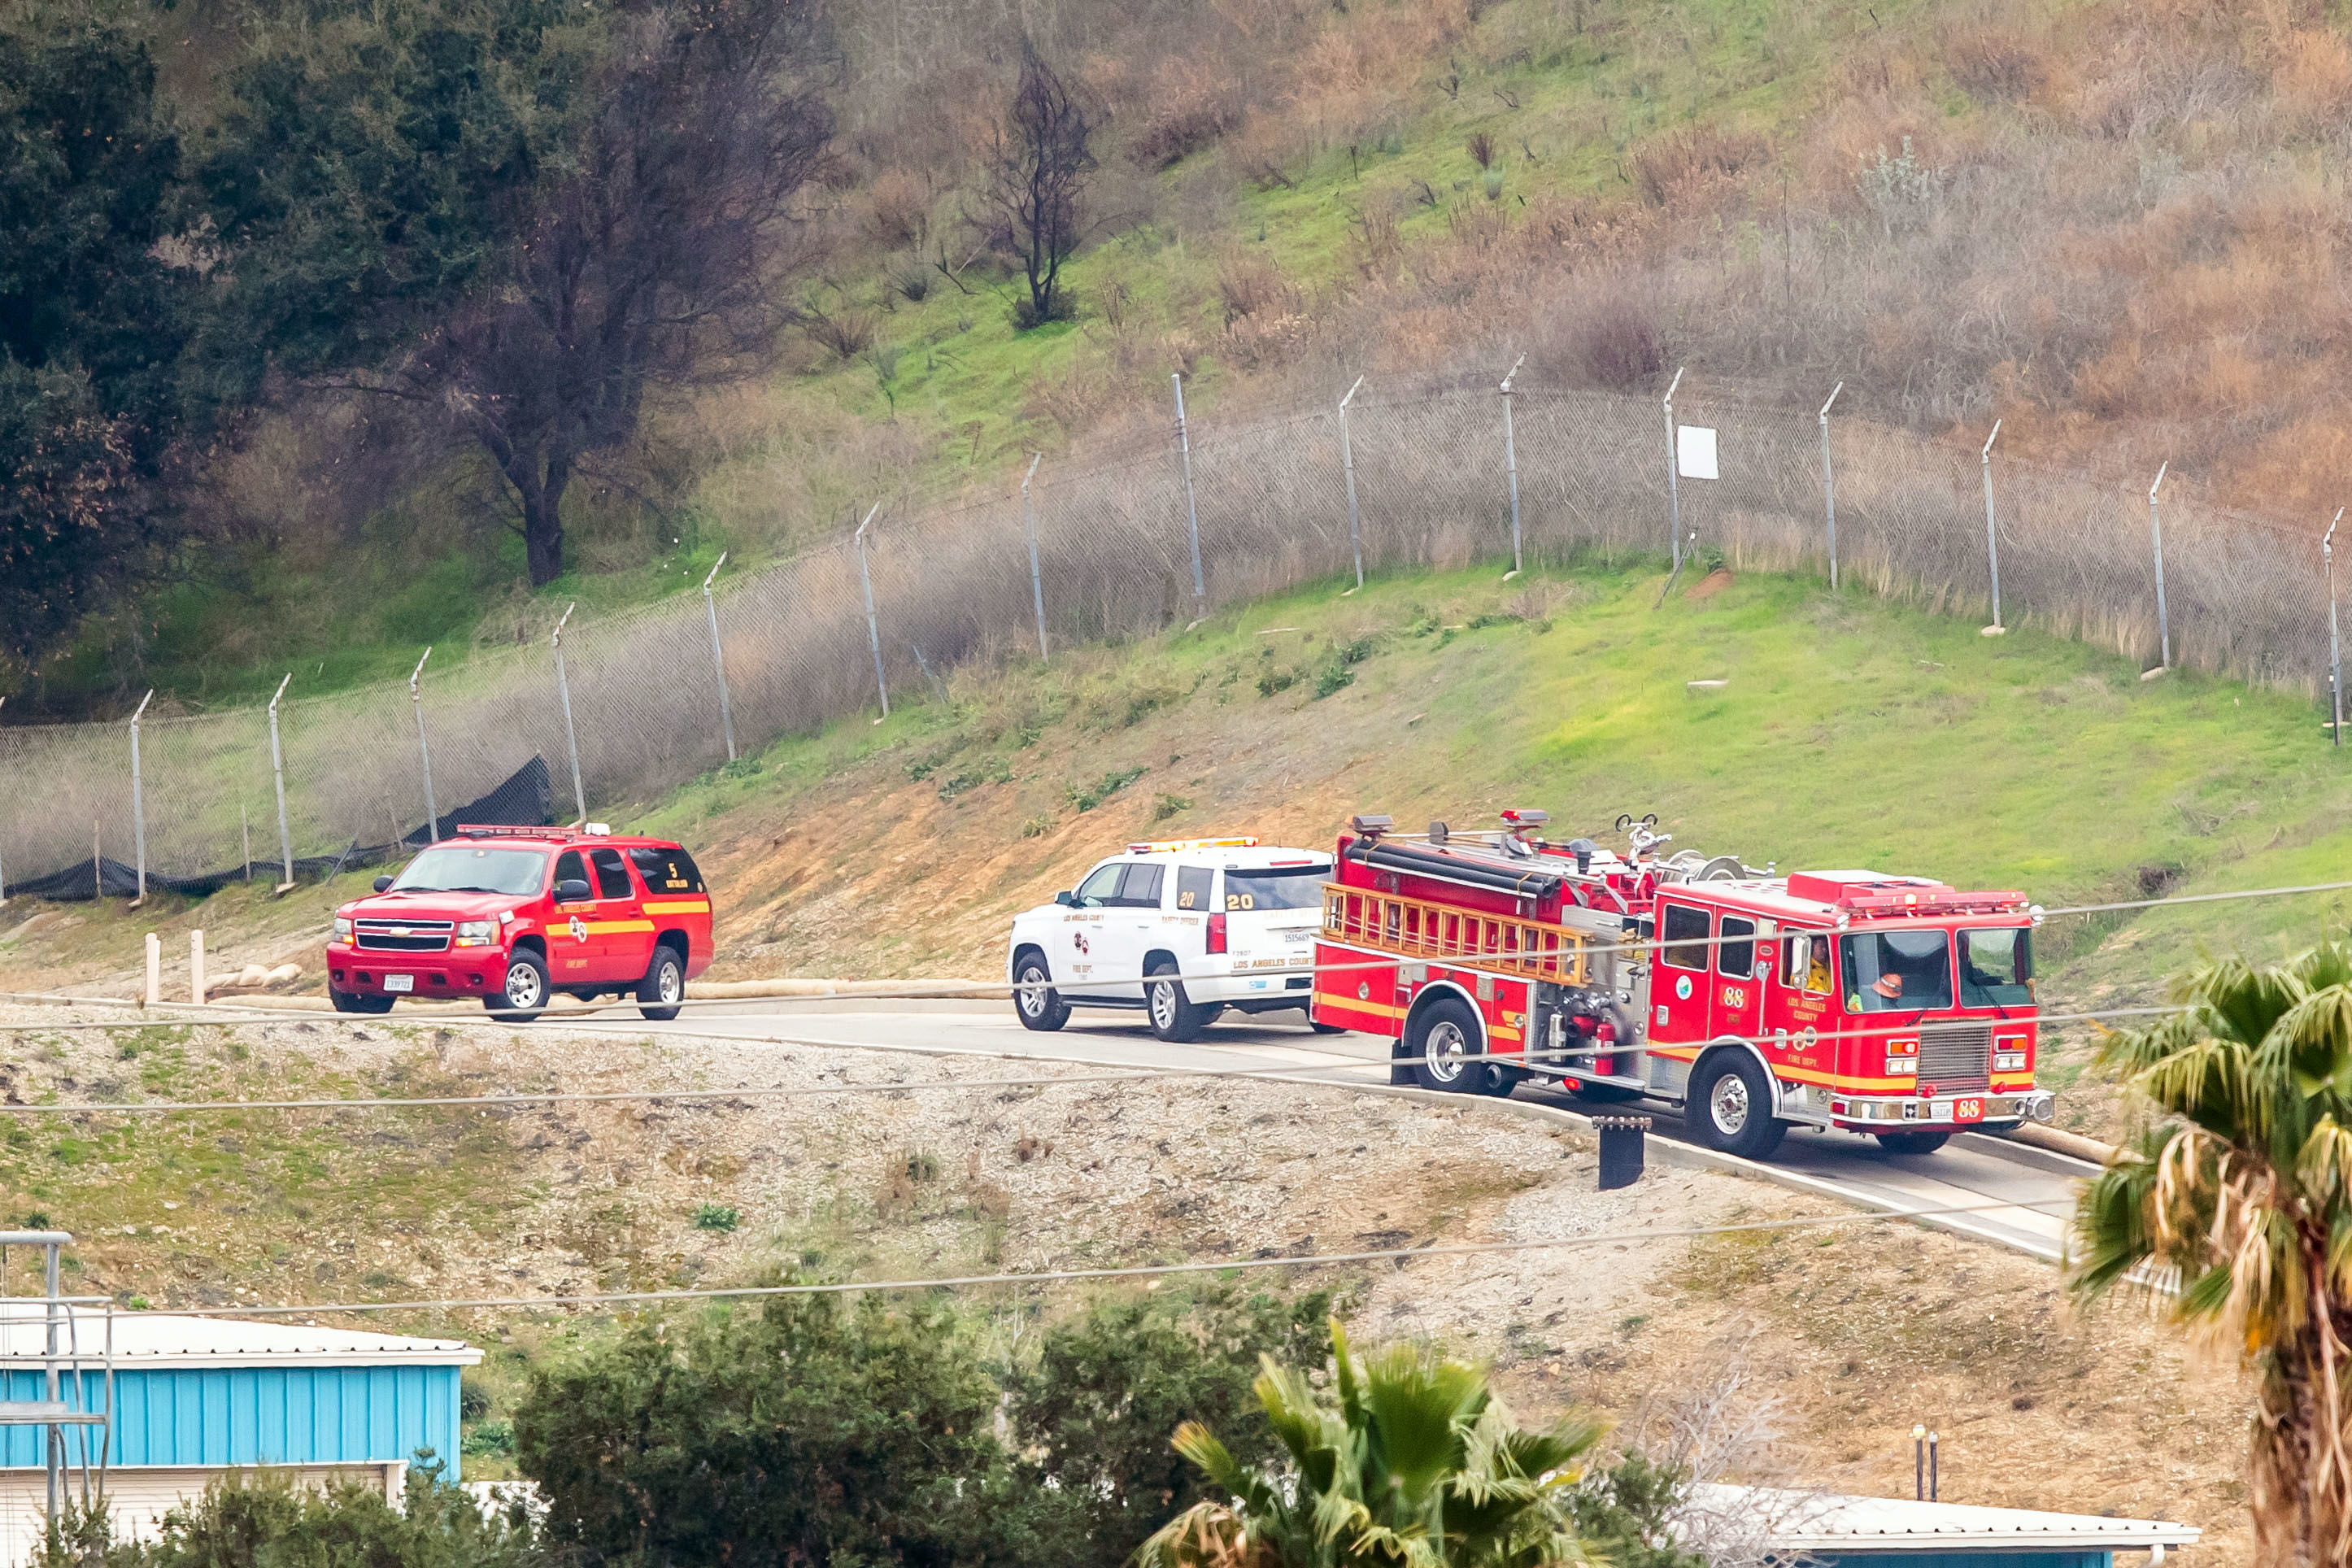 Firetrucks and a police vehicle at the site of a helicopter crash on January 26, 2020, in Calabasas, California